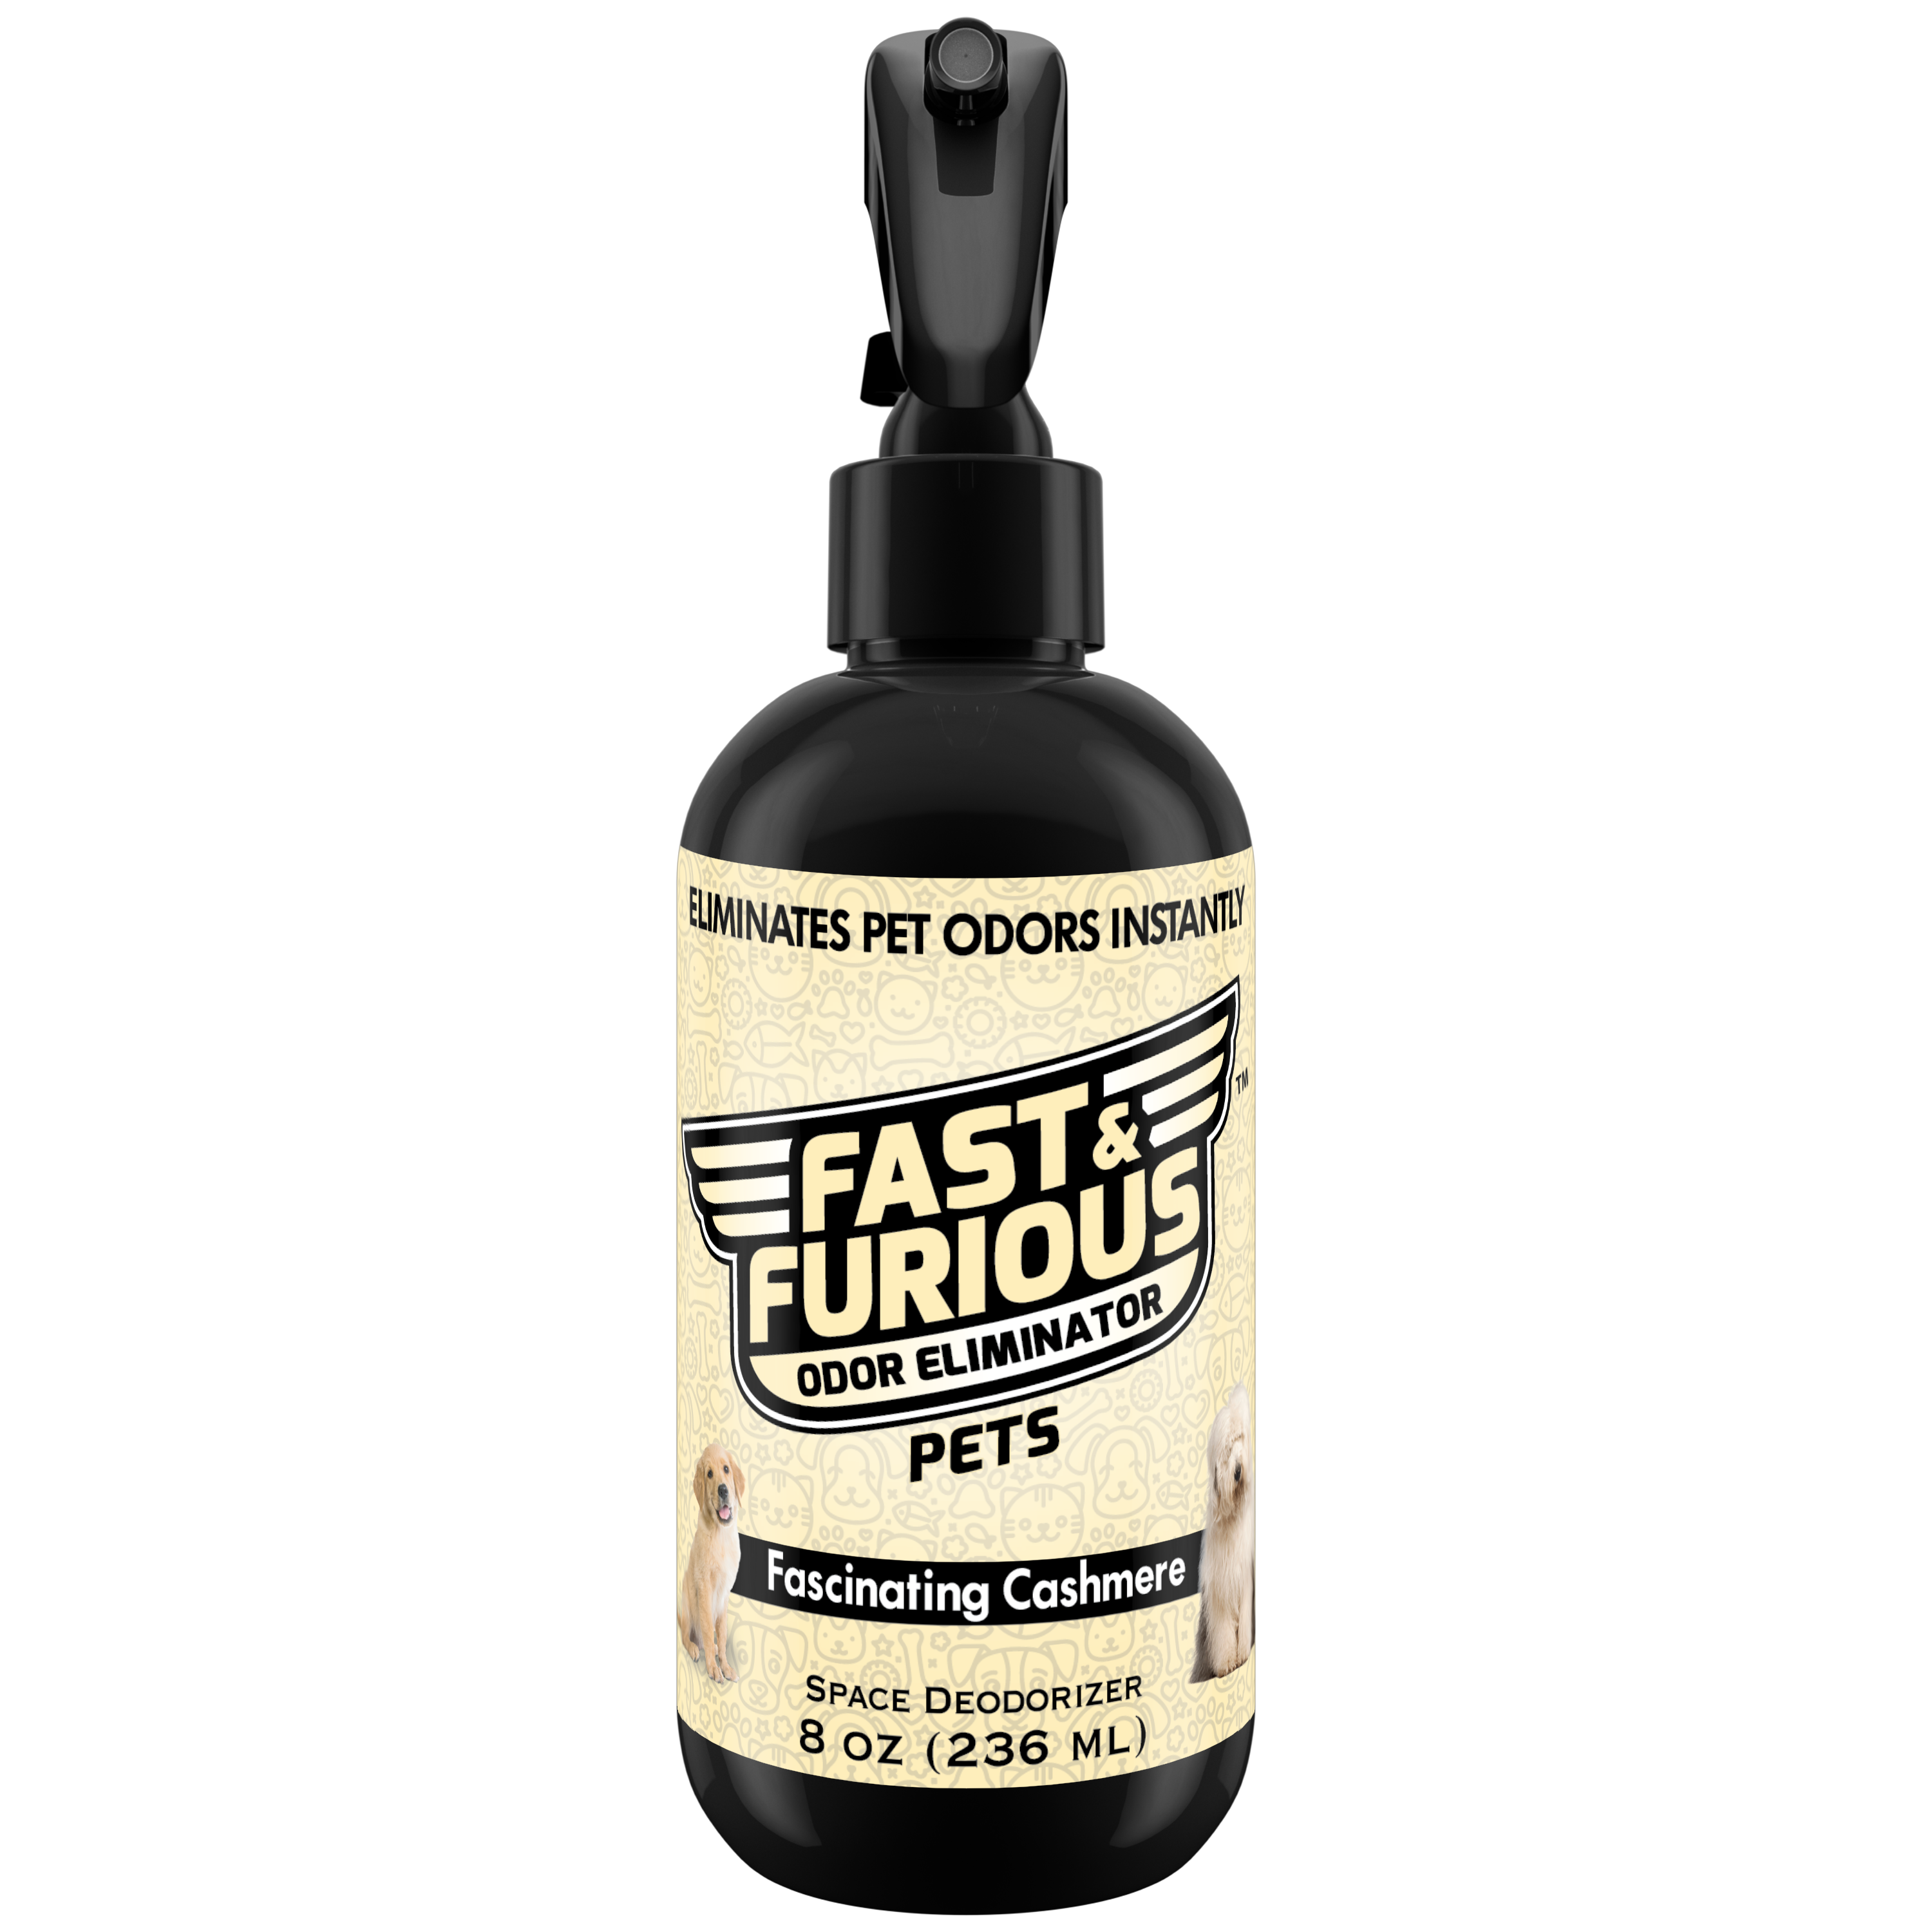 Fast and Furious Pets Odor Eliminator - Fascinating Cashmere Scent